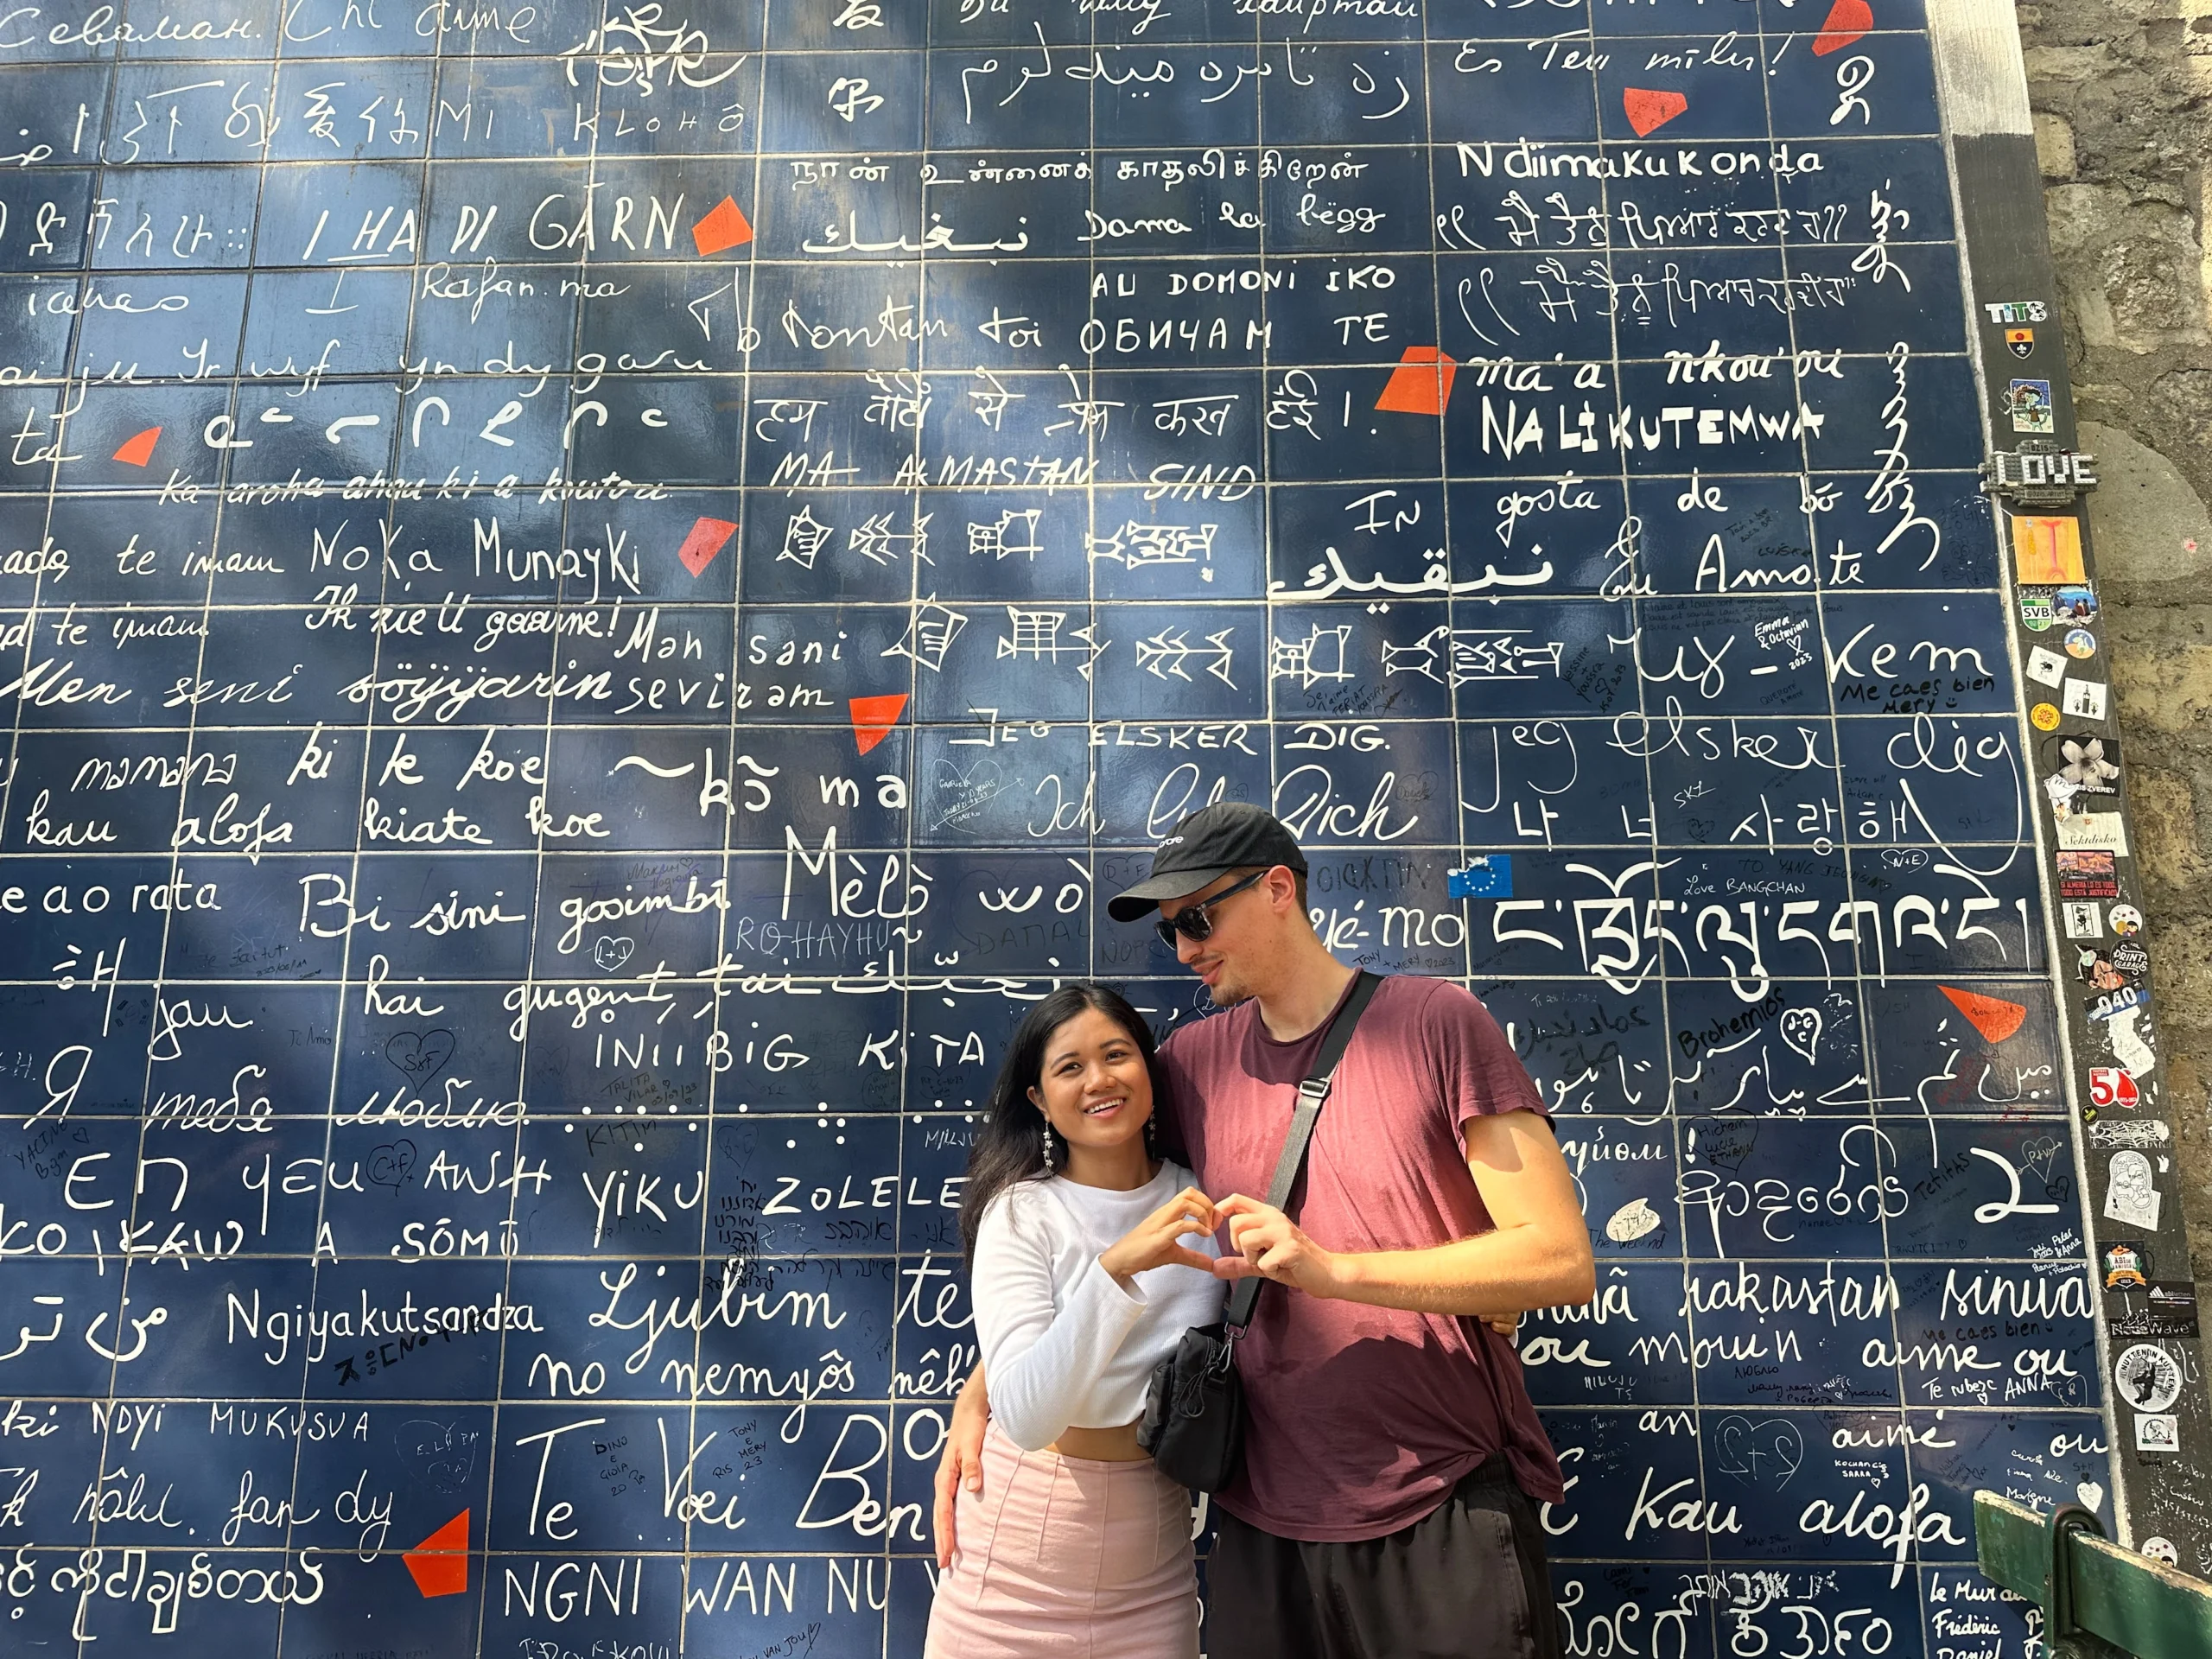 Me and my partner, Mat form a heart shape with their hands in front of the "Wall of Love" in Paris, where the phrase "I love you" is written in various languages on blue-tiled backdrop, a testament to the universal language of love.